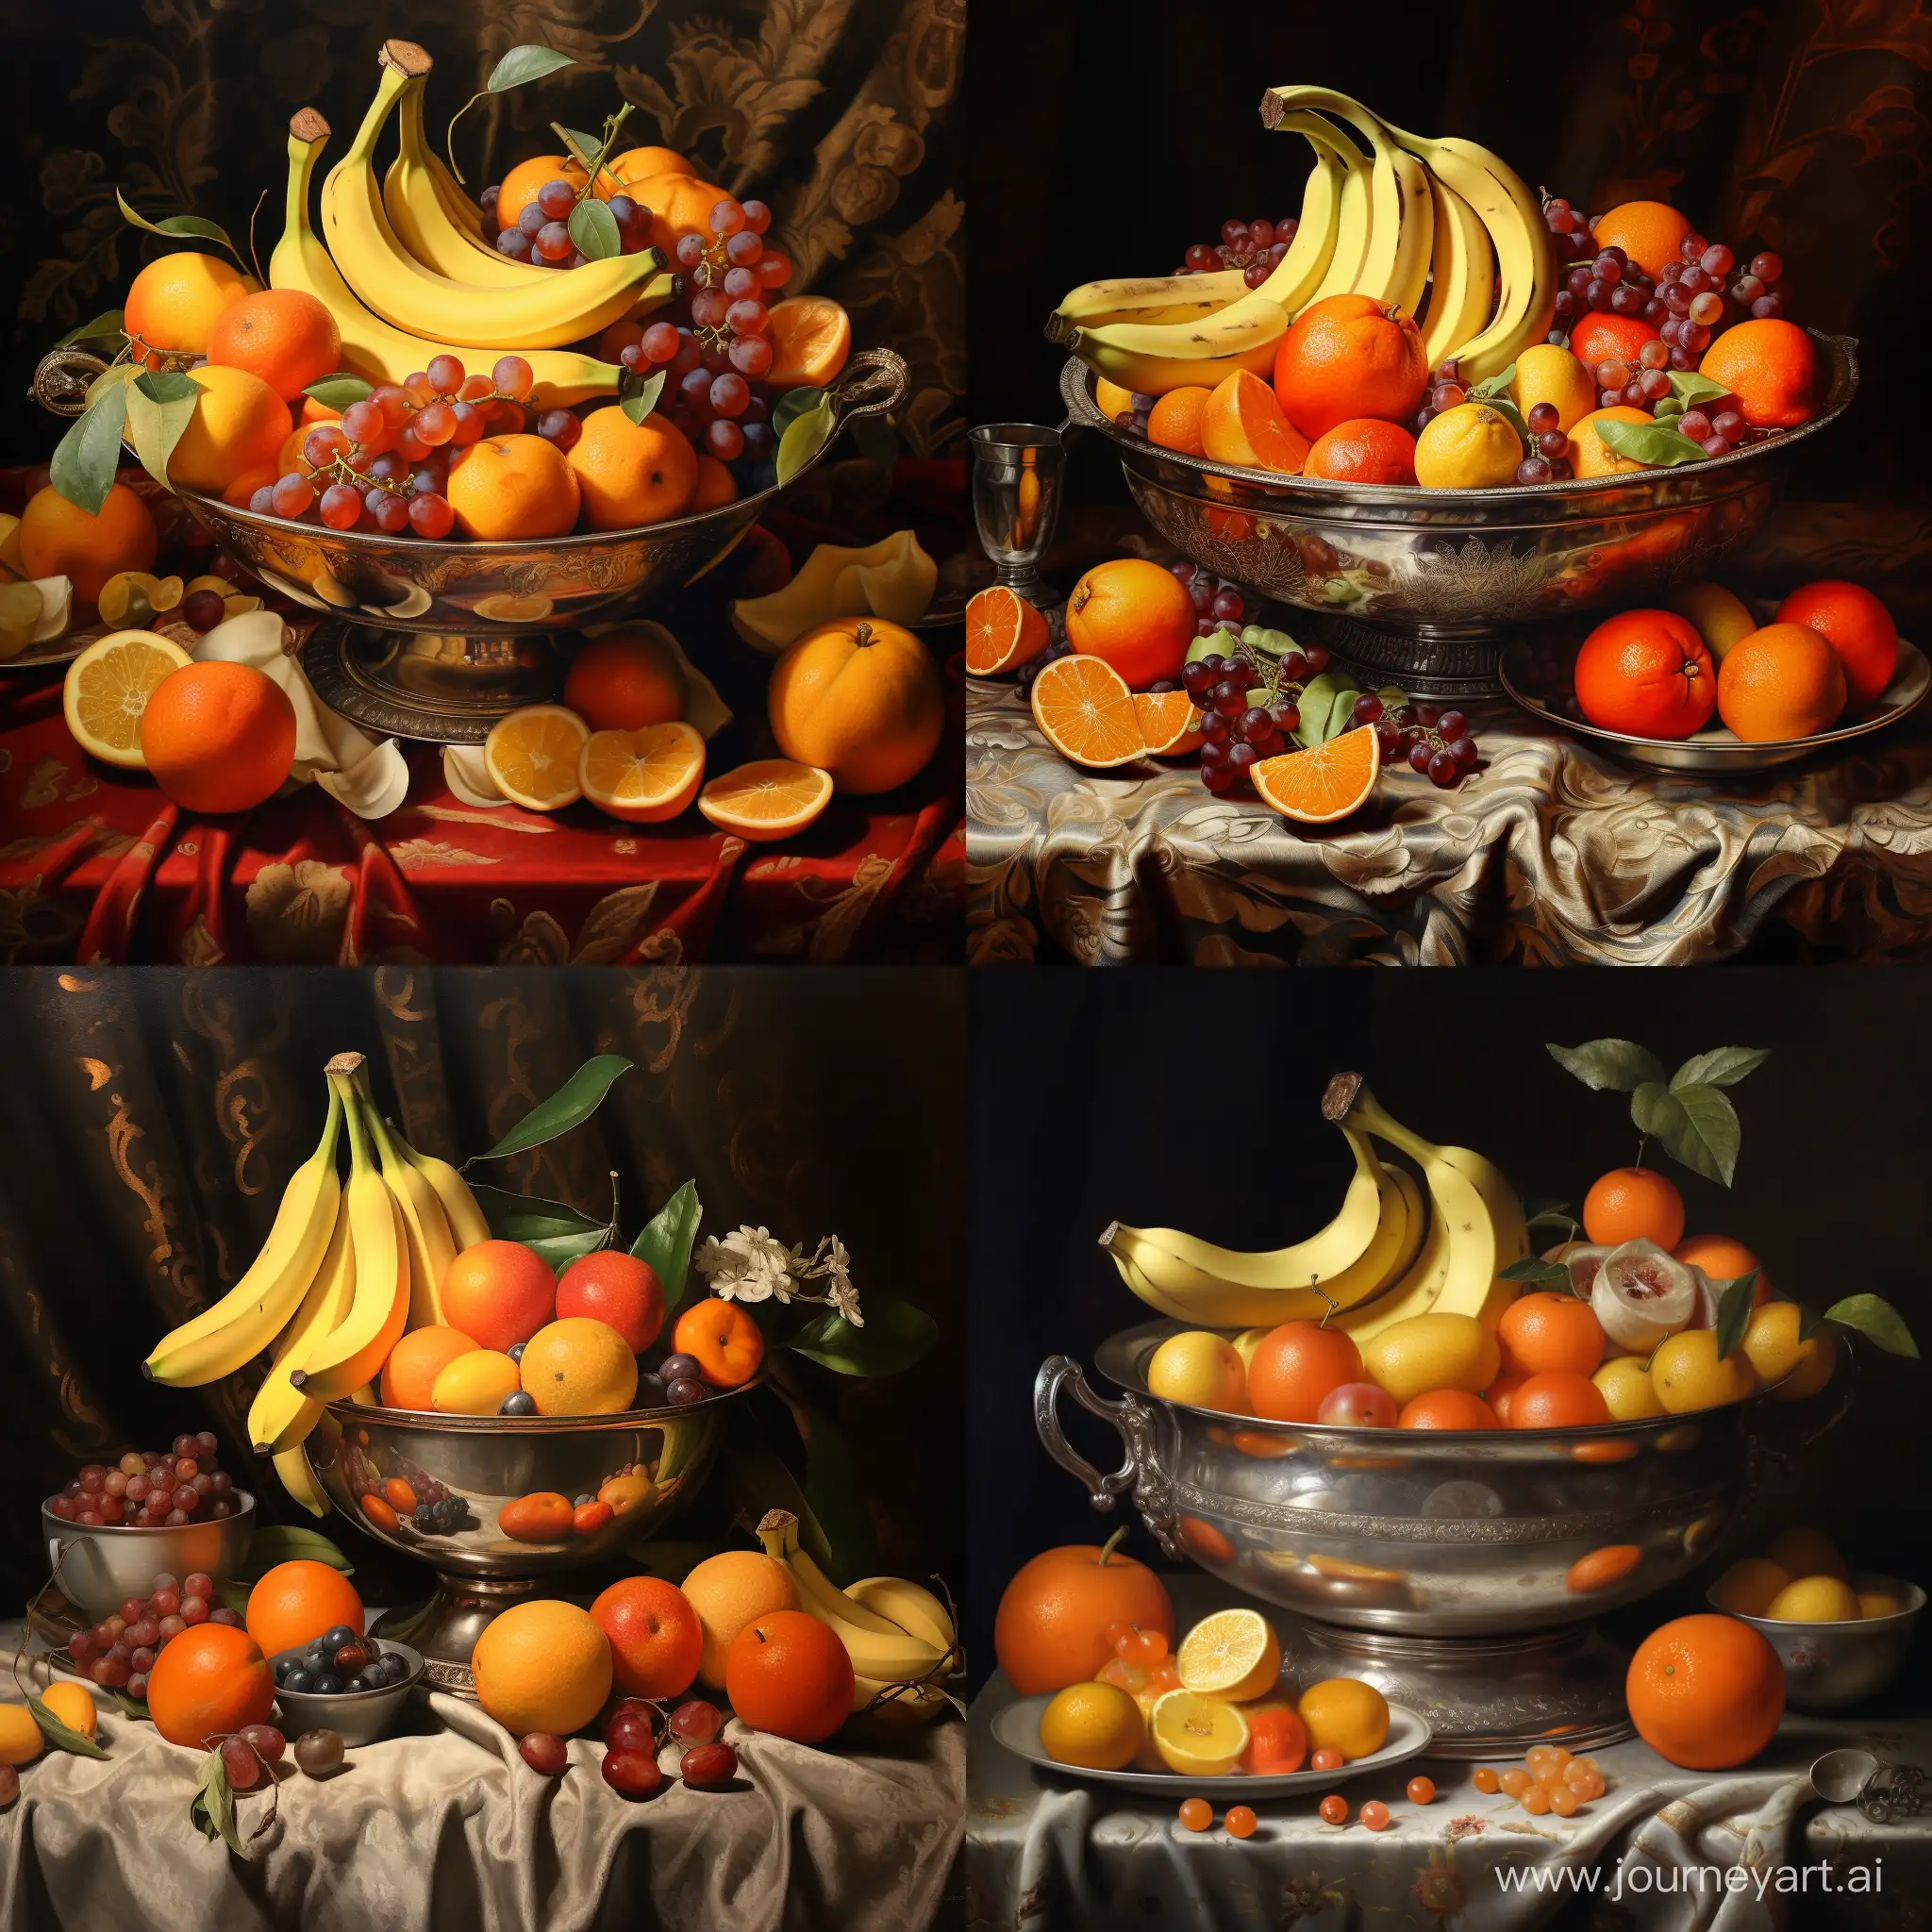 Exquisite-Still-Life-Oranges-and-Bananas-in-a-16thCentury-Inspired-Silver-Bowl